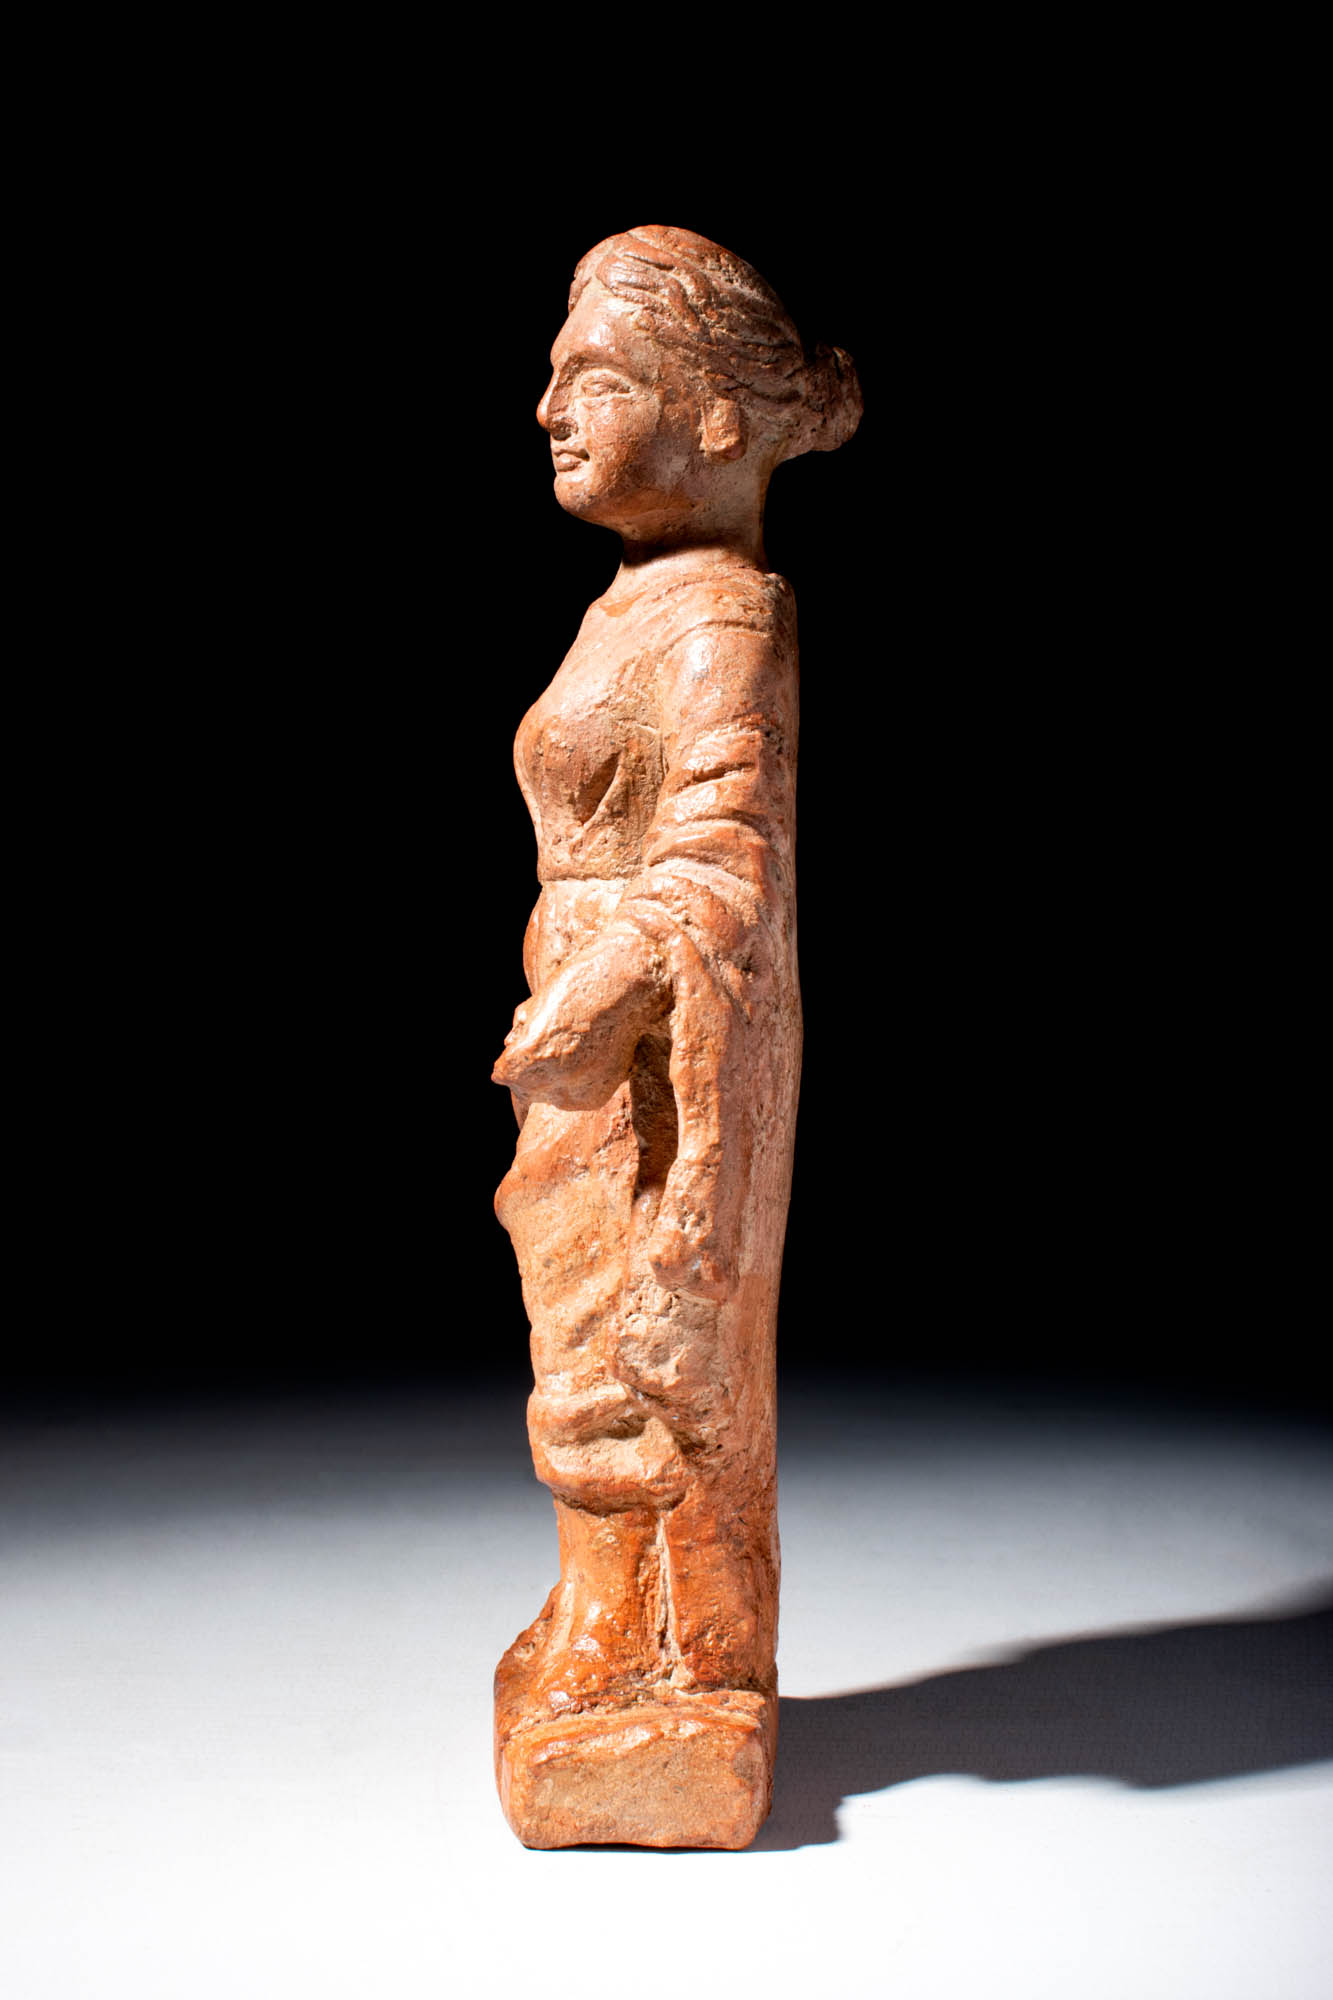 GREEK TERRACOTTA FIGURINE OF A STANDING DRESSED WOMAN - Image 3 of 4